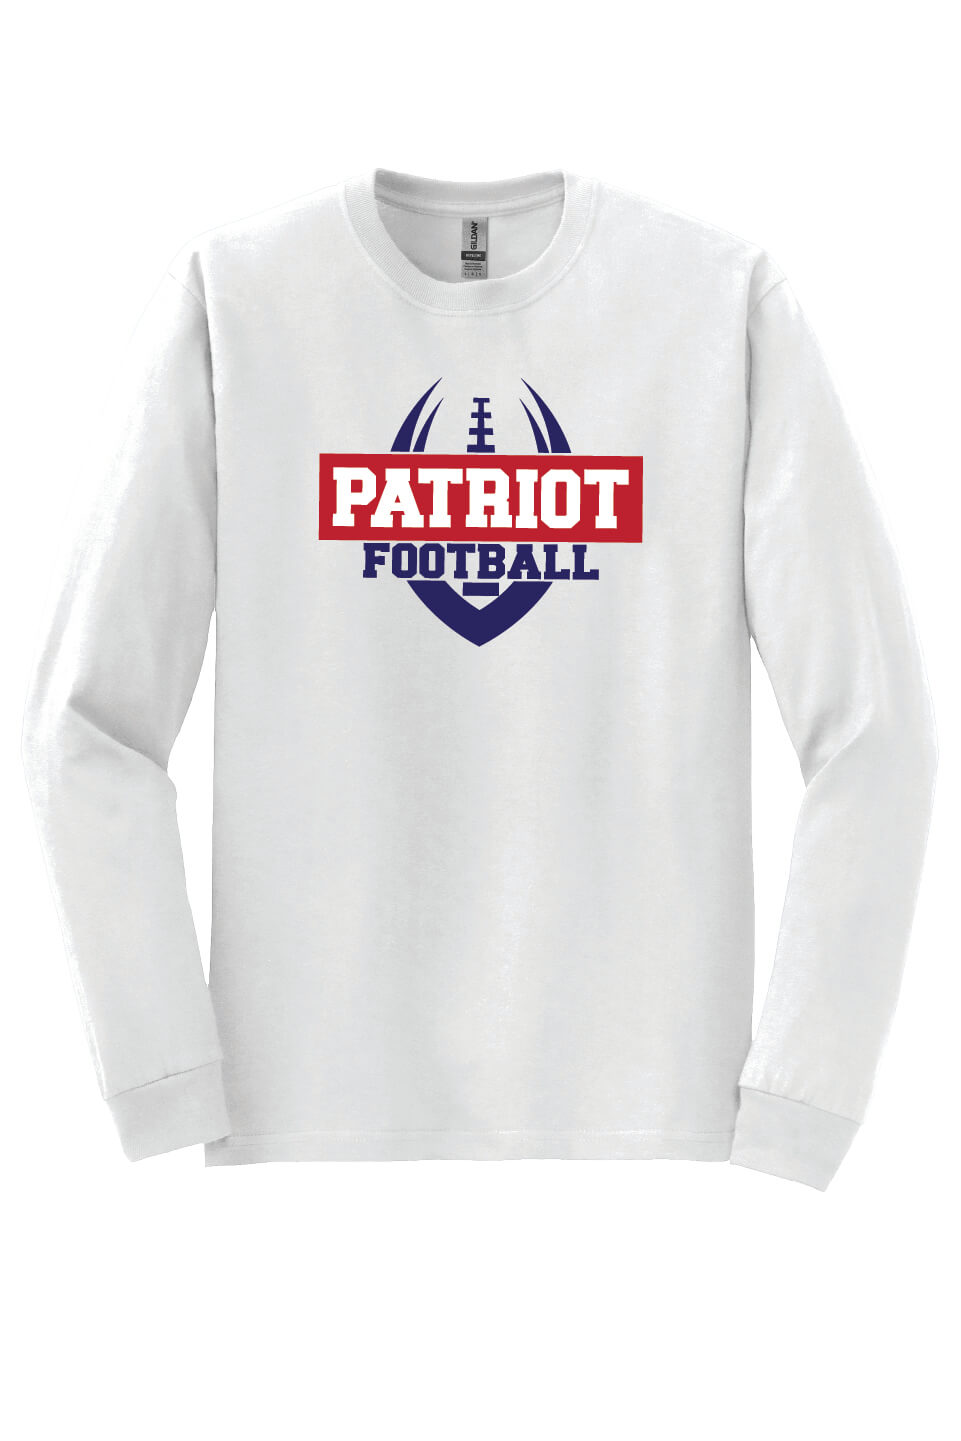 Patriot Football Long Sleeve T-shirts (Youth) white